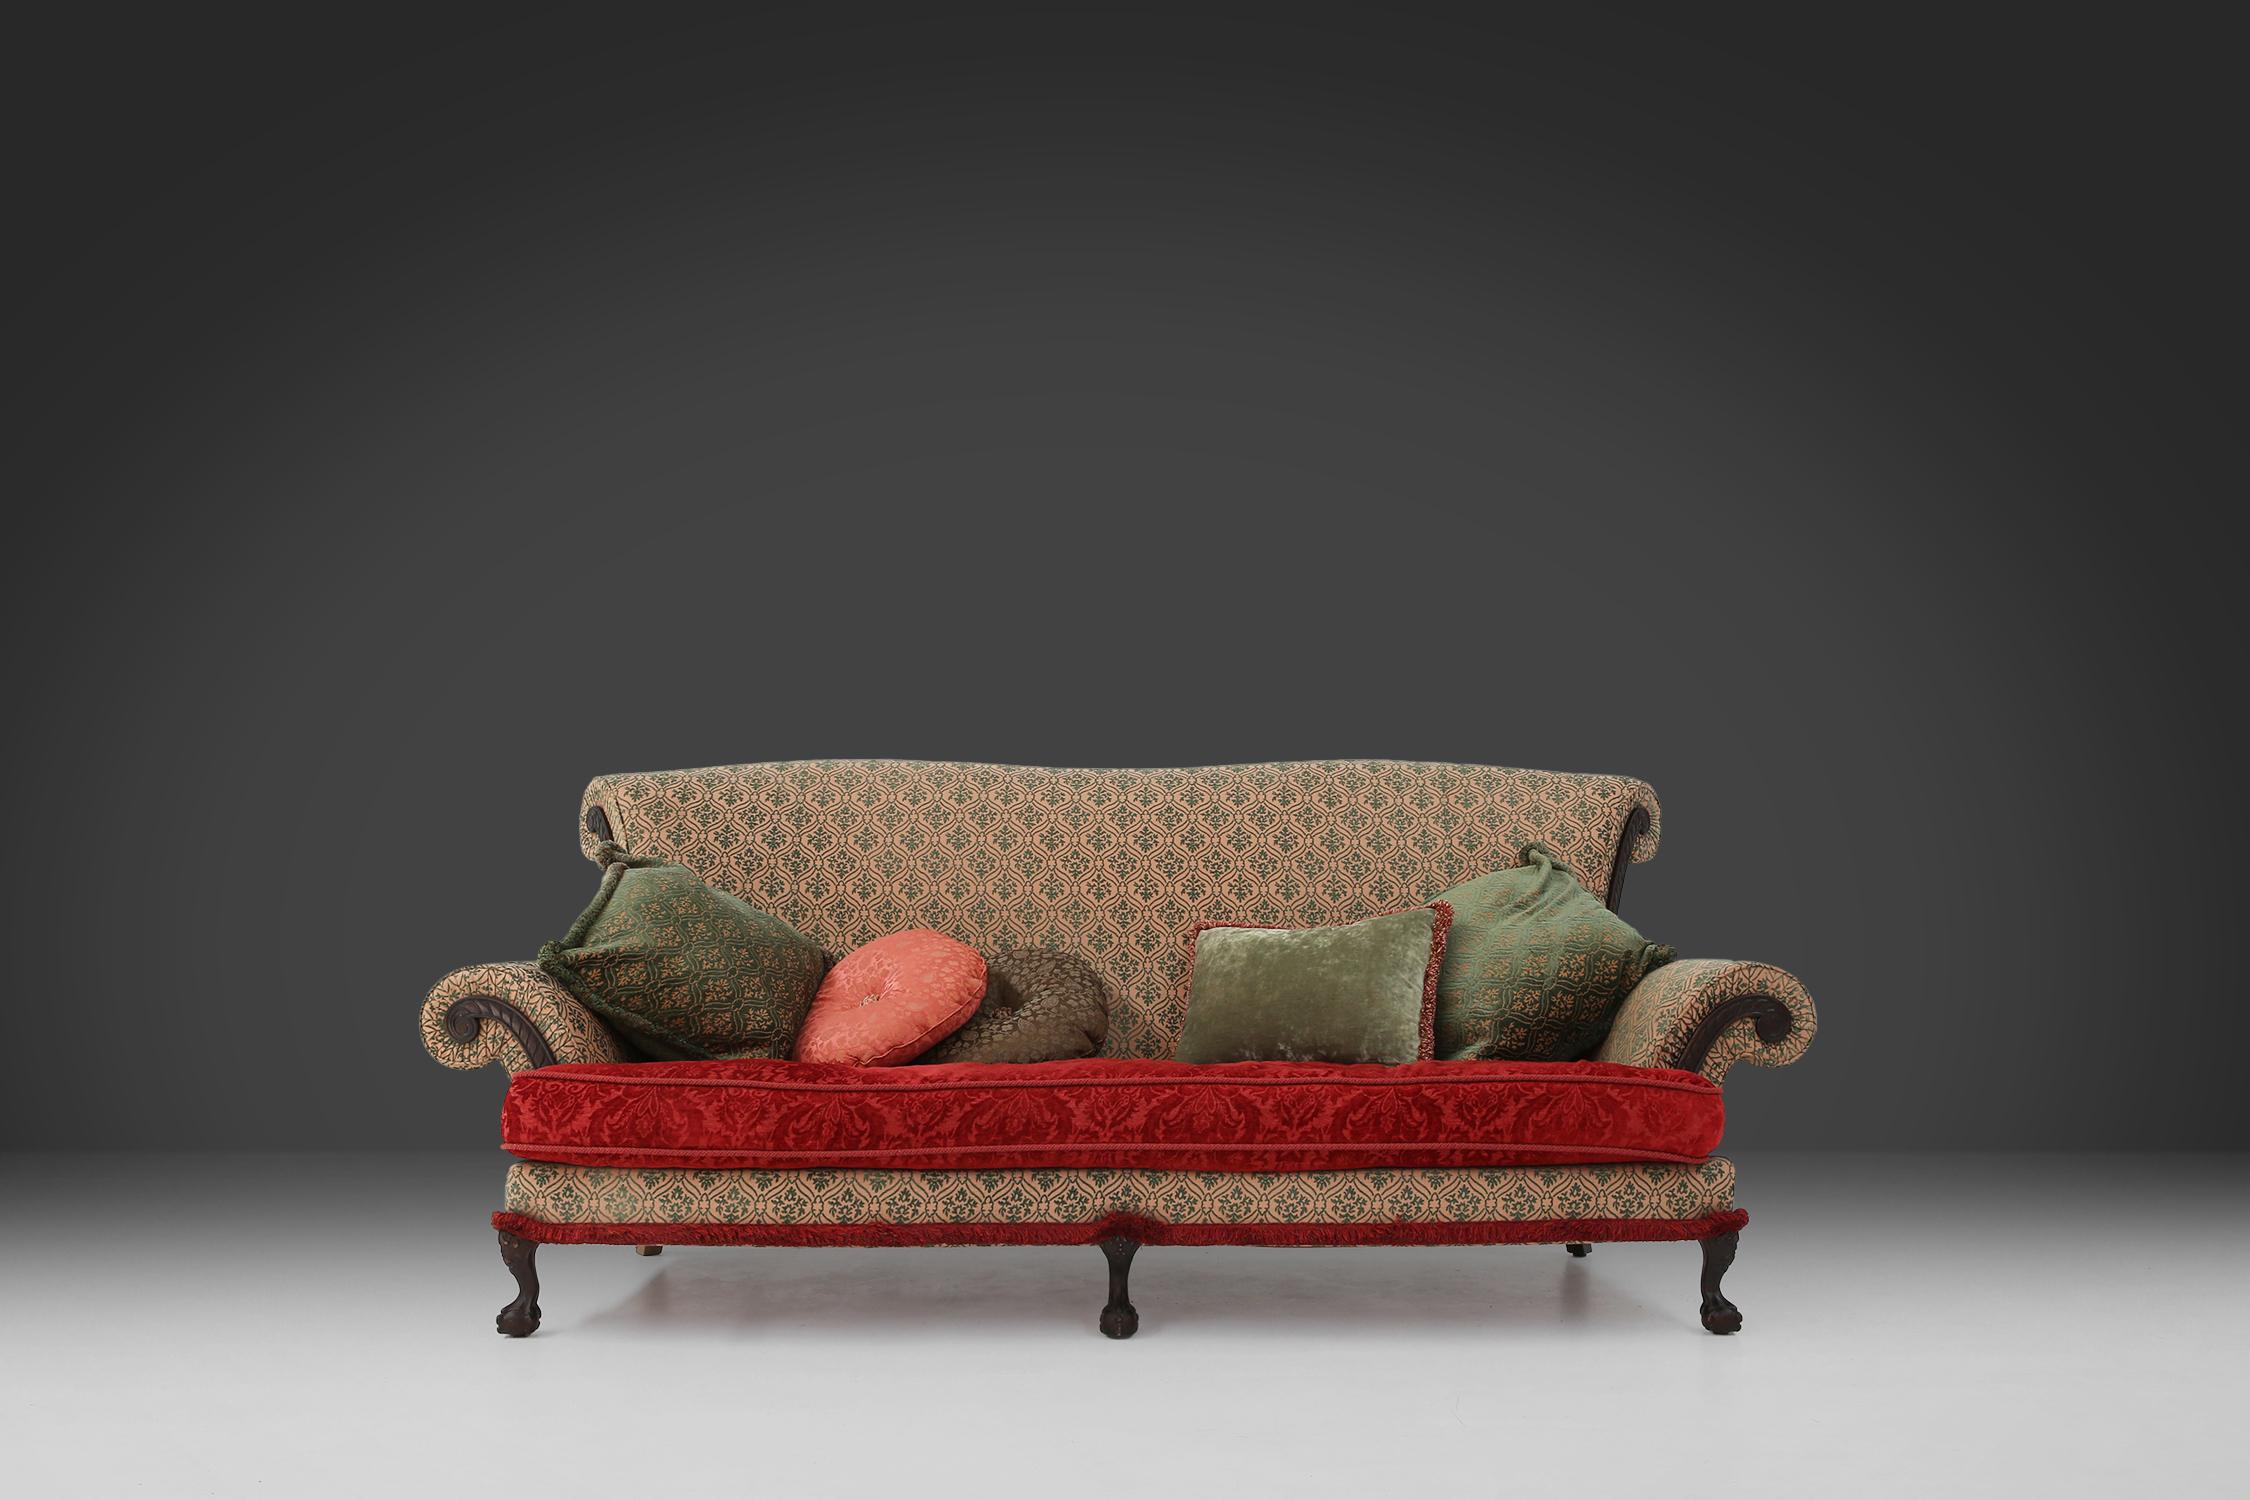 This large Victorian sofa that dates back to 1890 has a comfortable and deep seat, allowing you to relax. The seat is made of full wood and has elegant claw and ball feet, which give it a classic look. The fabric of the seat has a beautiful beige